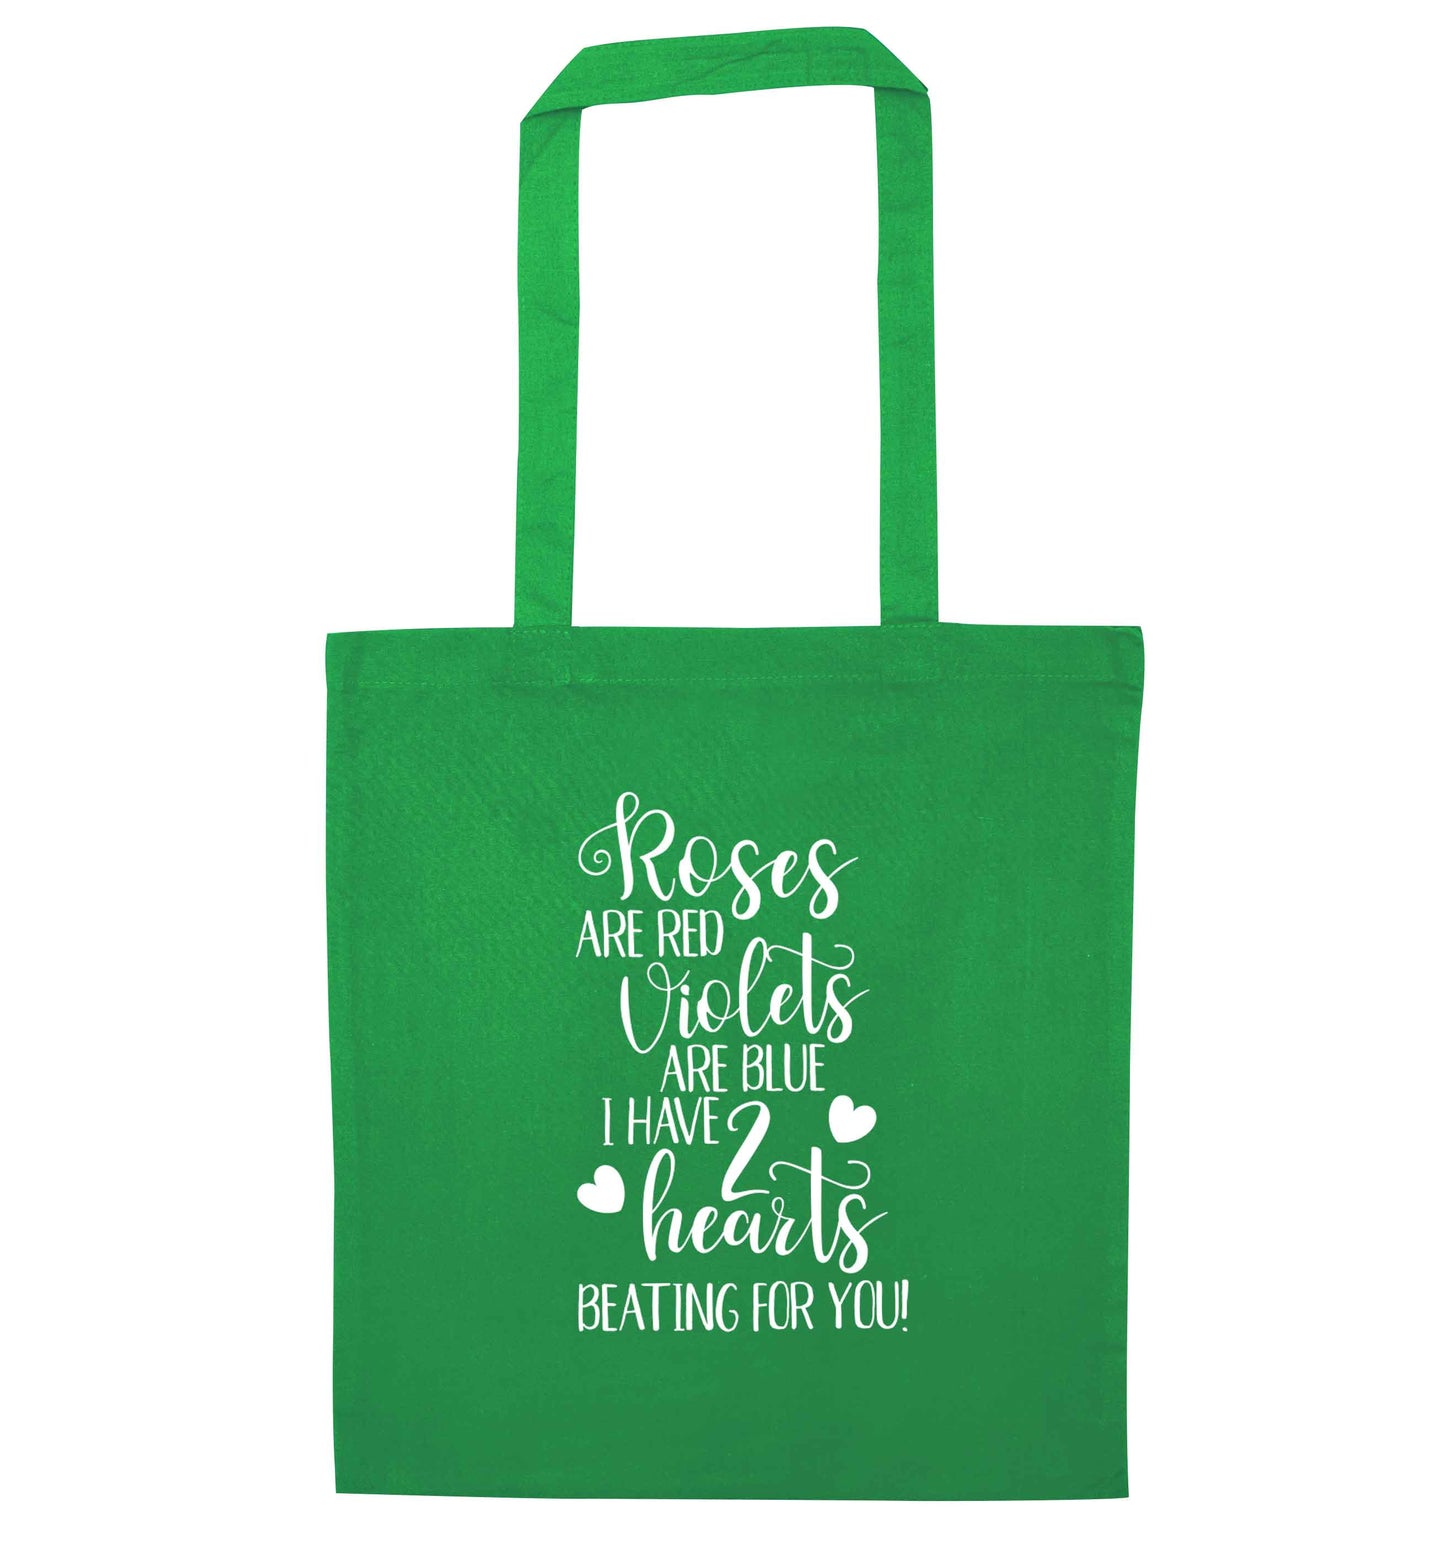 Roses are red violets are blue I have two hearts beating for you green tote bag